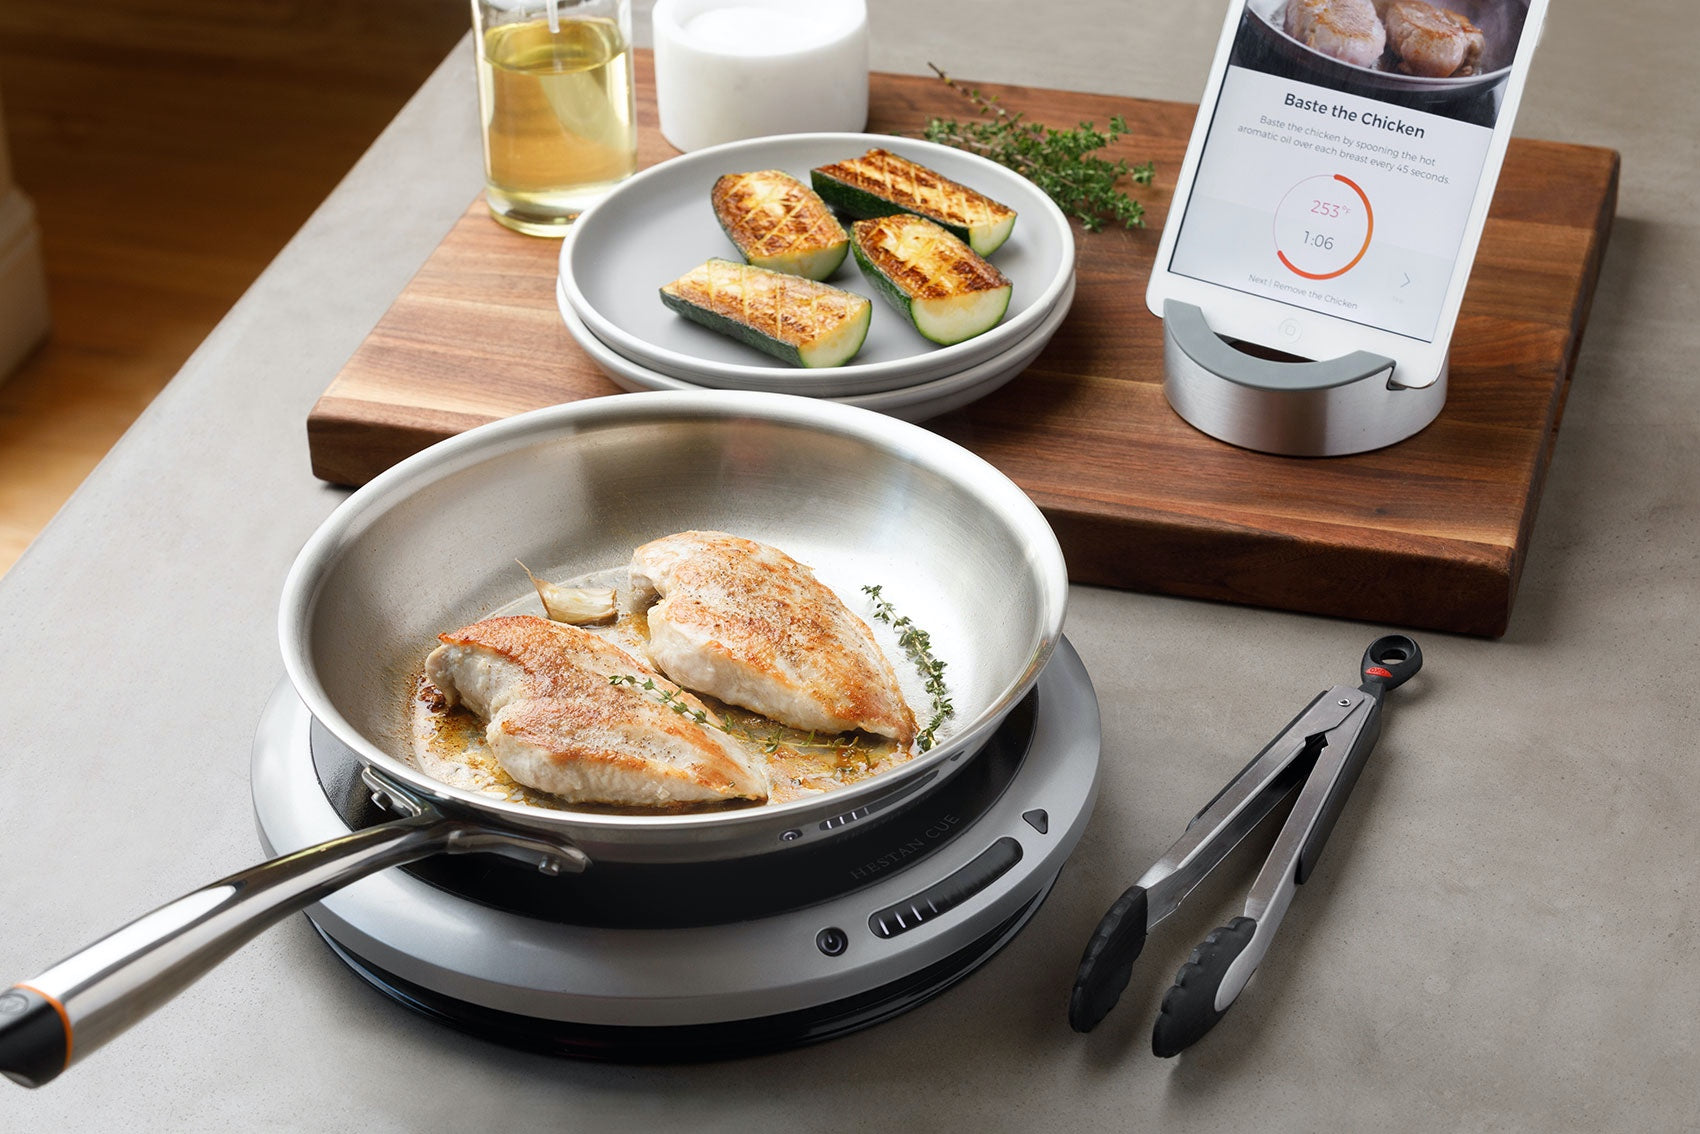 Hestan Smart Induction Cooktop Review: Dial in Temps Down to the Degree